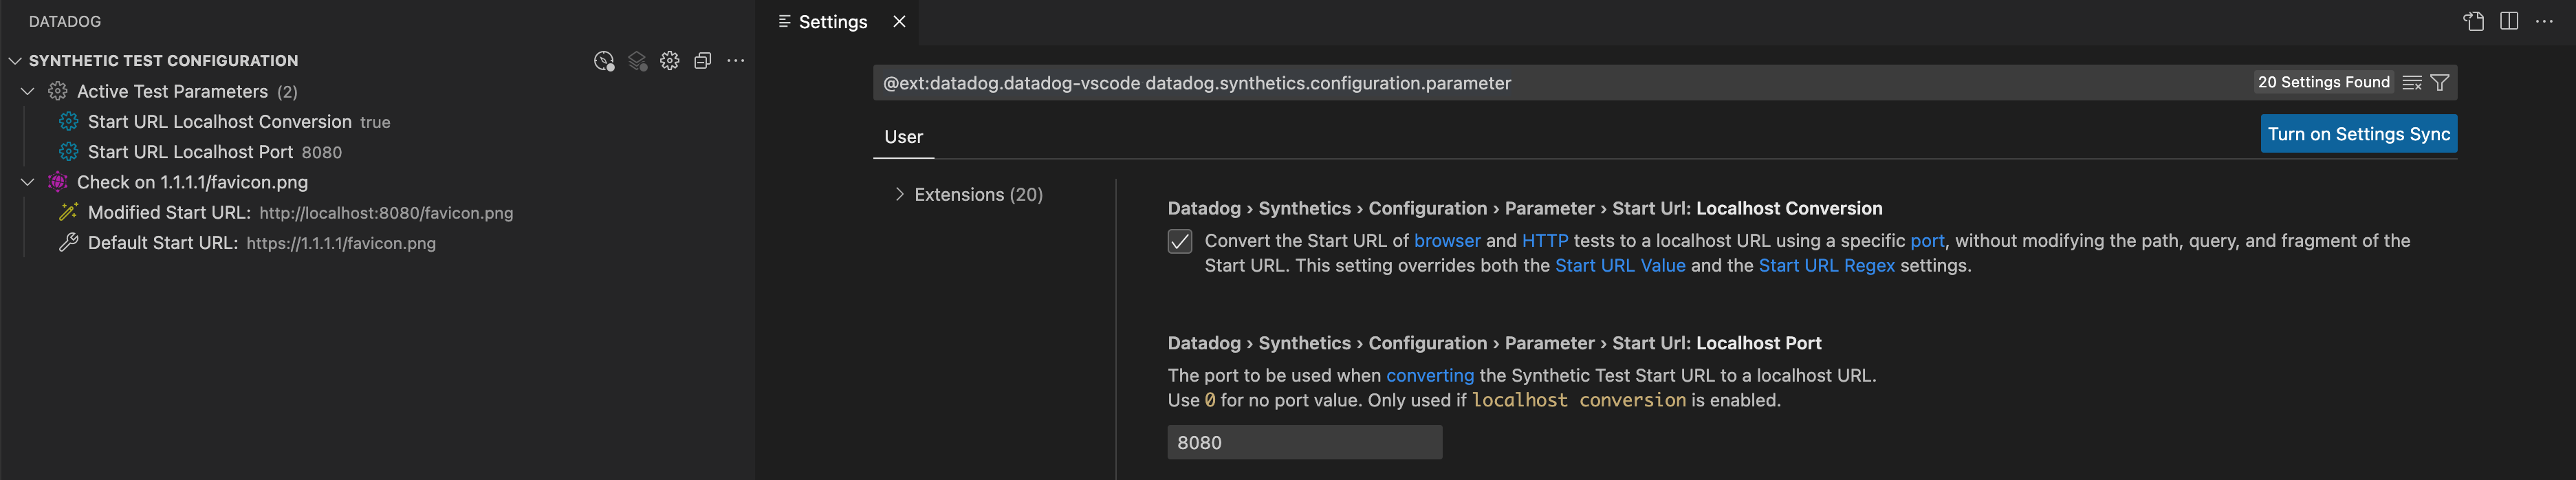 The Test Configuration panel and Settings page where you can specify the start URL of a Synthetics test to a localhost URL